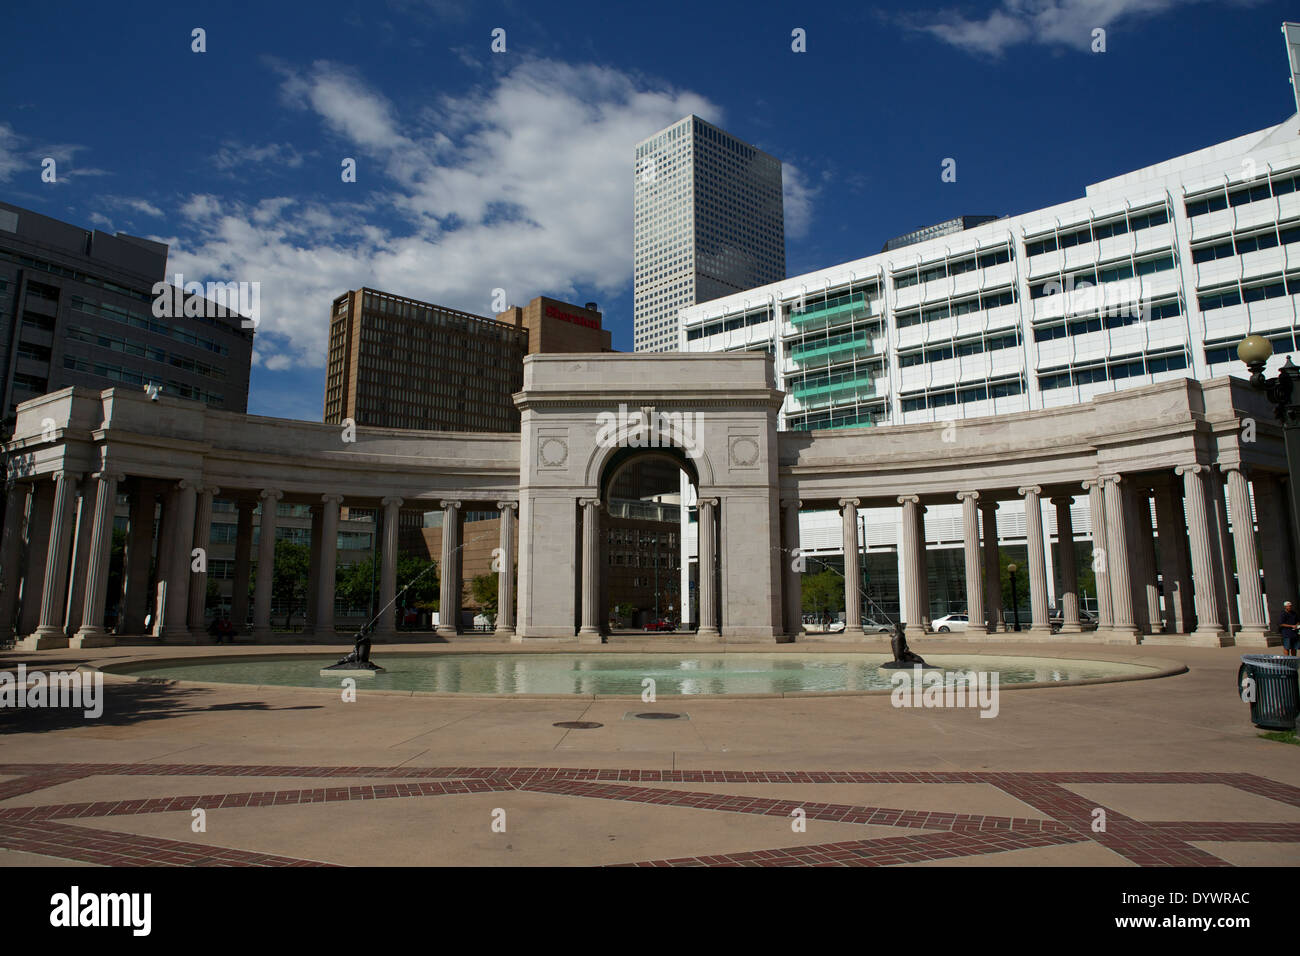 Civic Center (sic) Park with the Voorhies Memorial Seal Pond in the foreground in Denver, Colorado Stock Photo